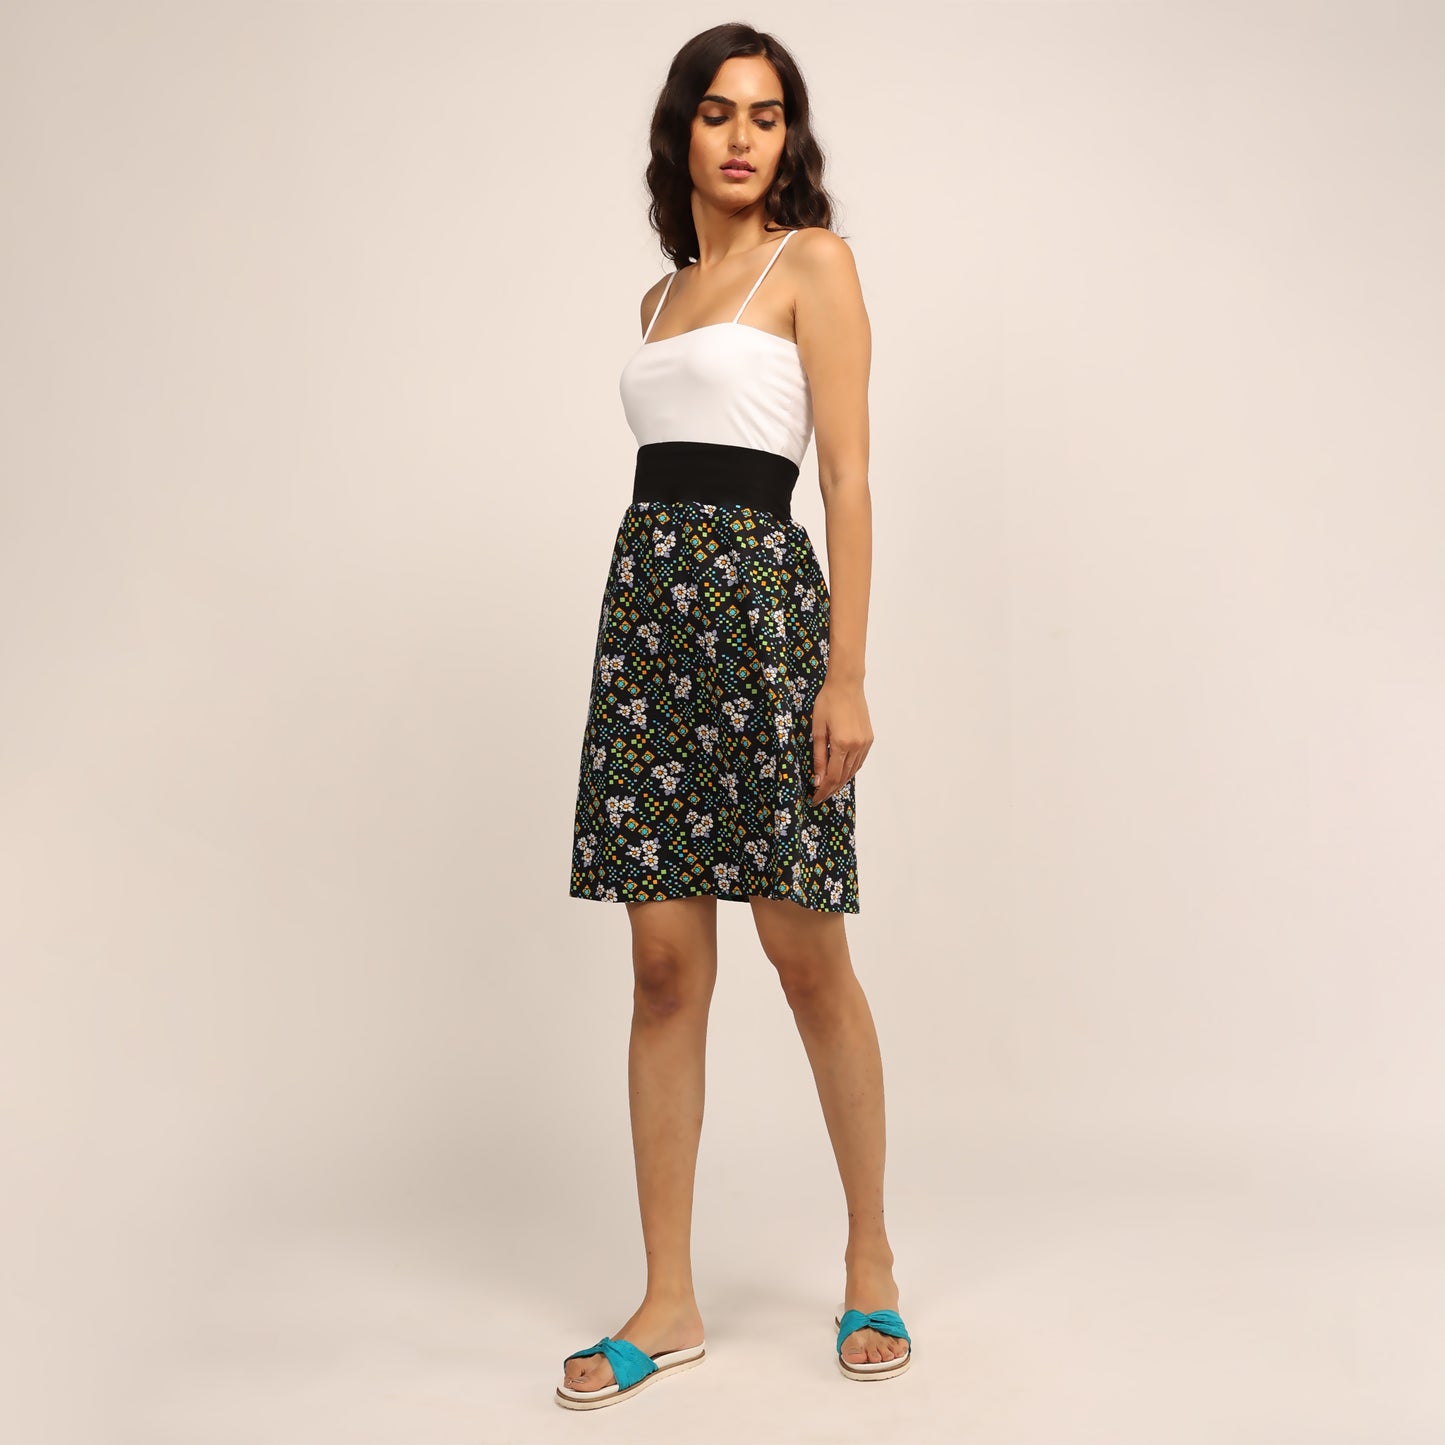 Reversible Skirt - Turquoise Mod & Daisy Lilac